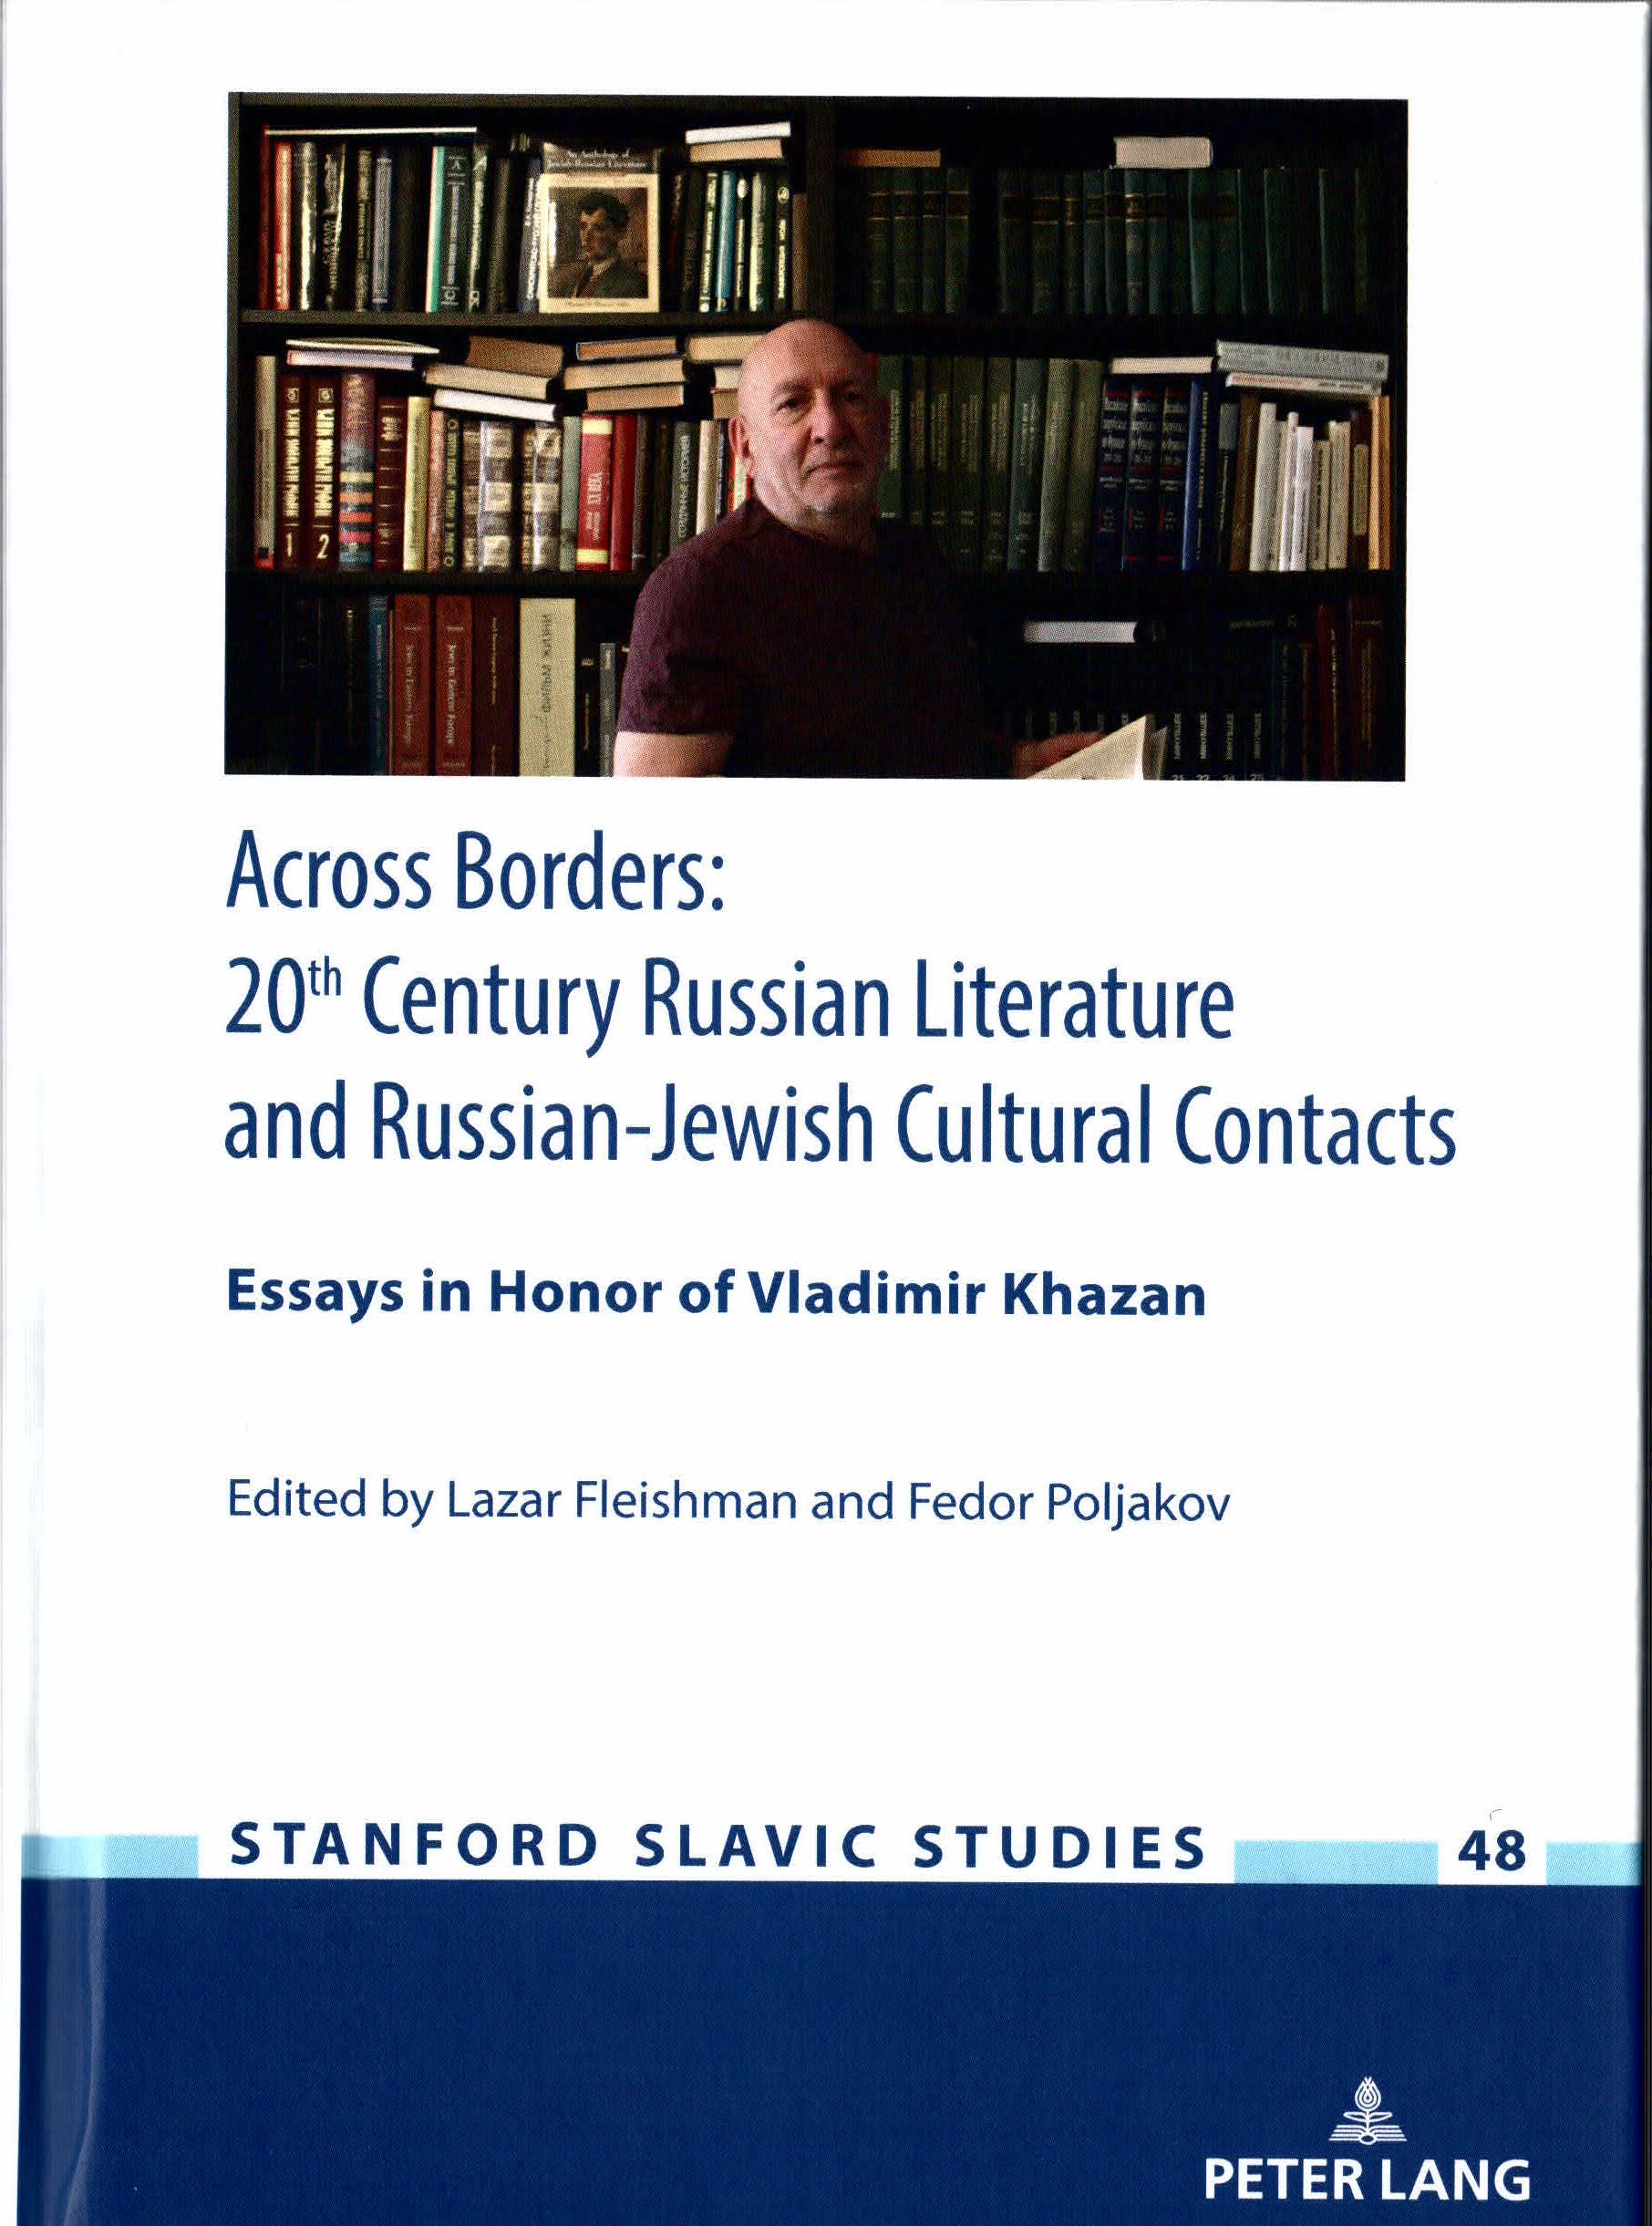 Across Borders: 20th Century Russian Literature and Russian-Jewish Cultural Contacts